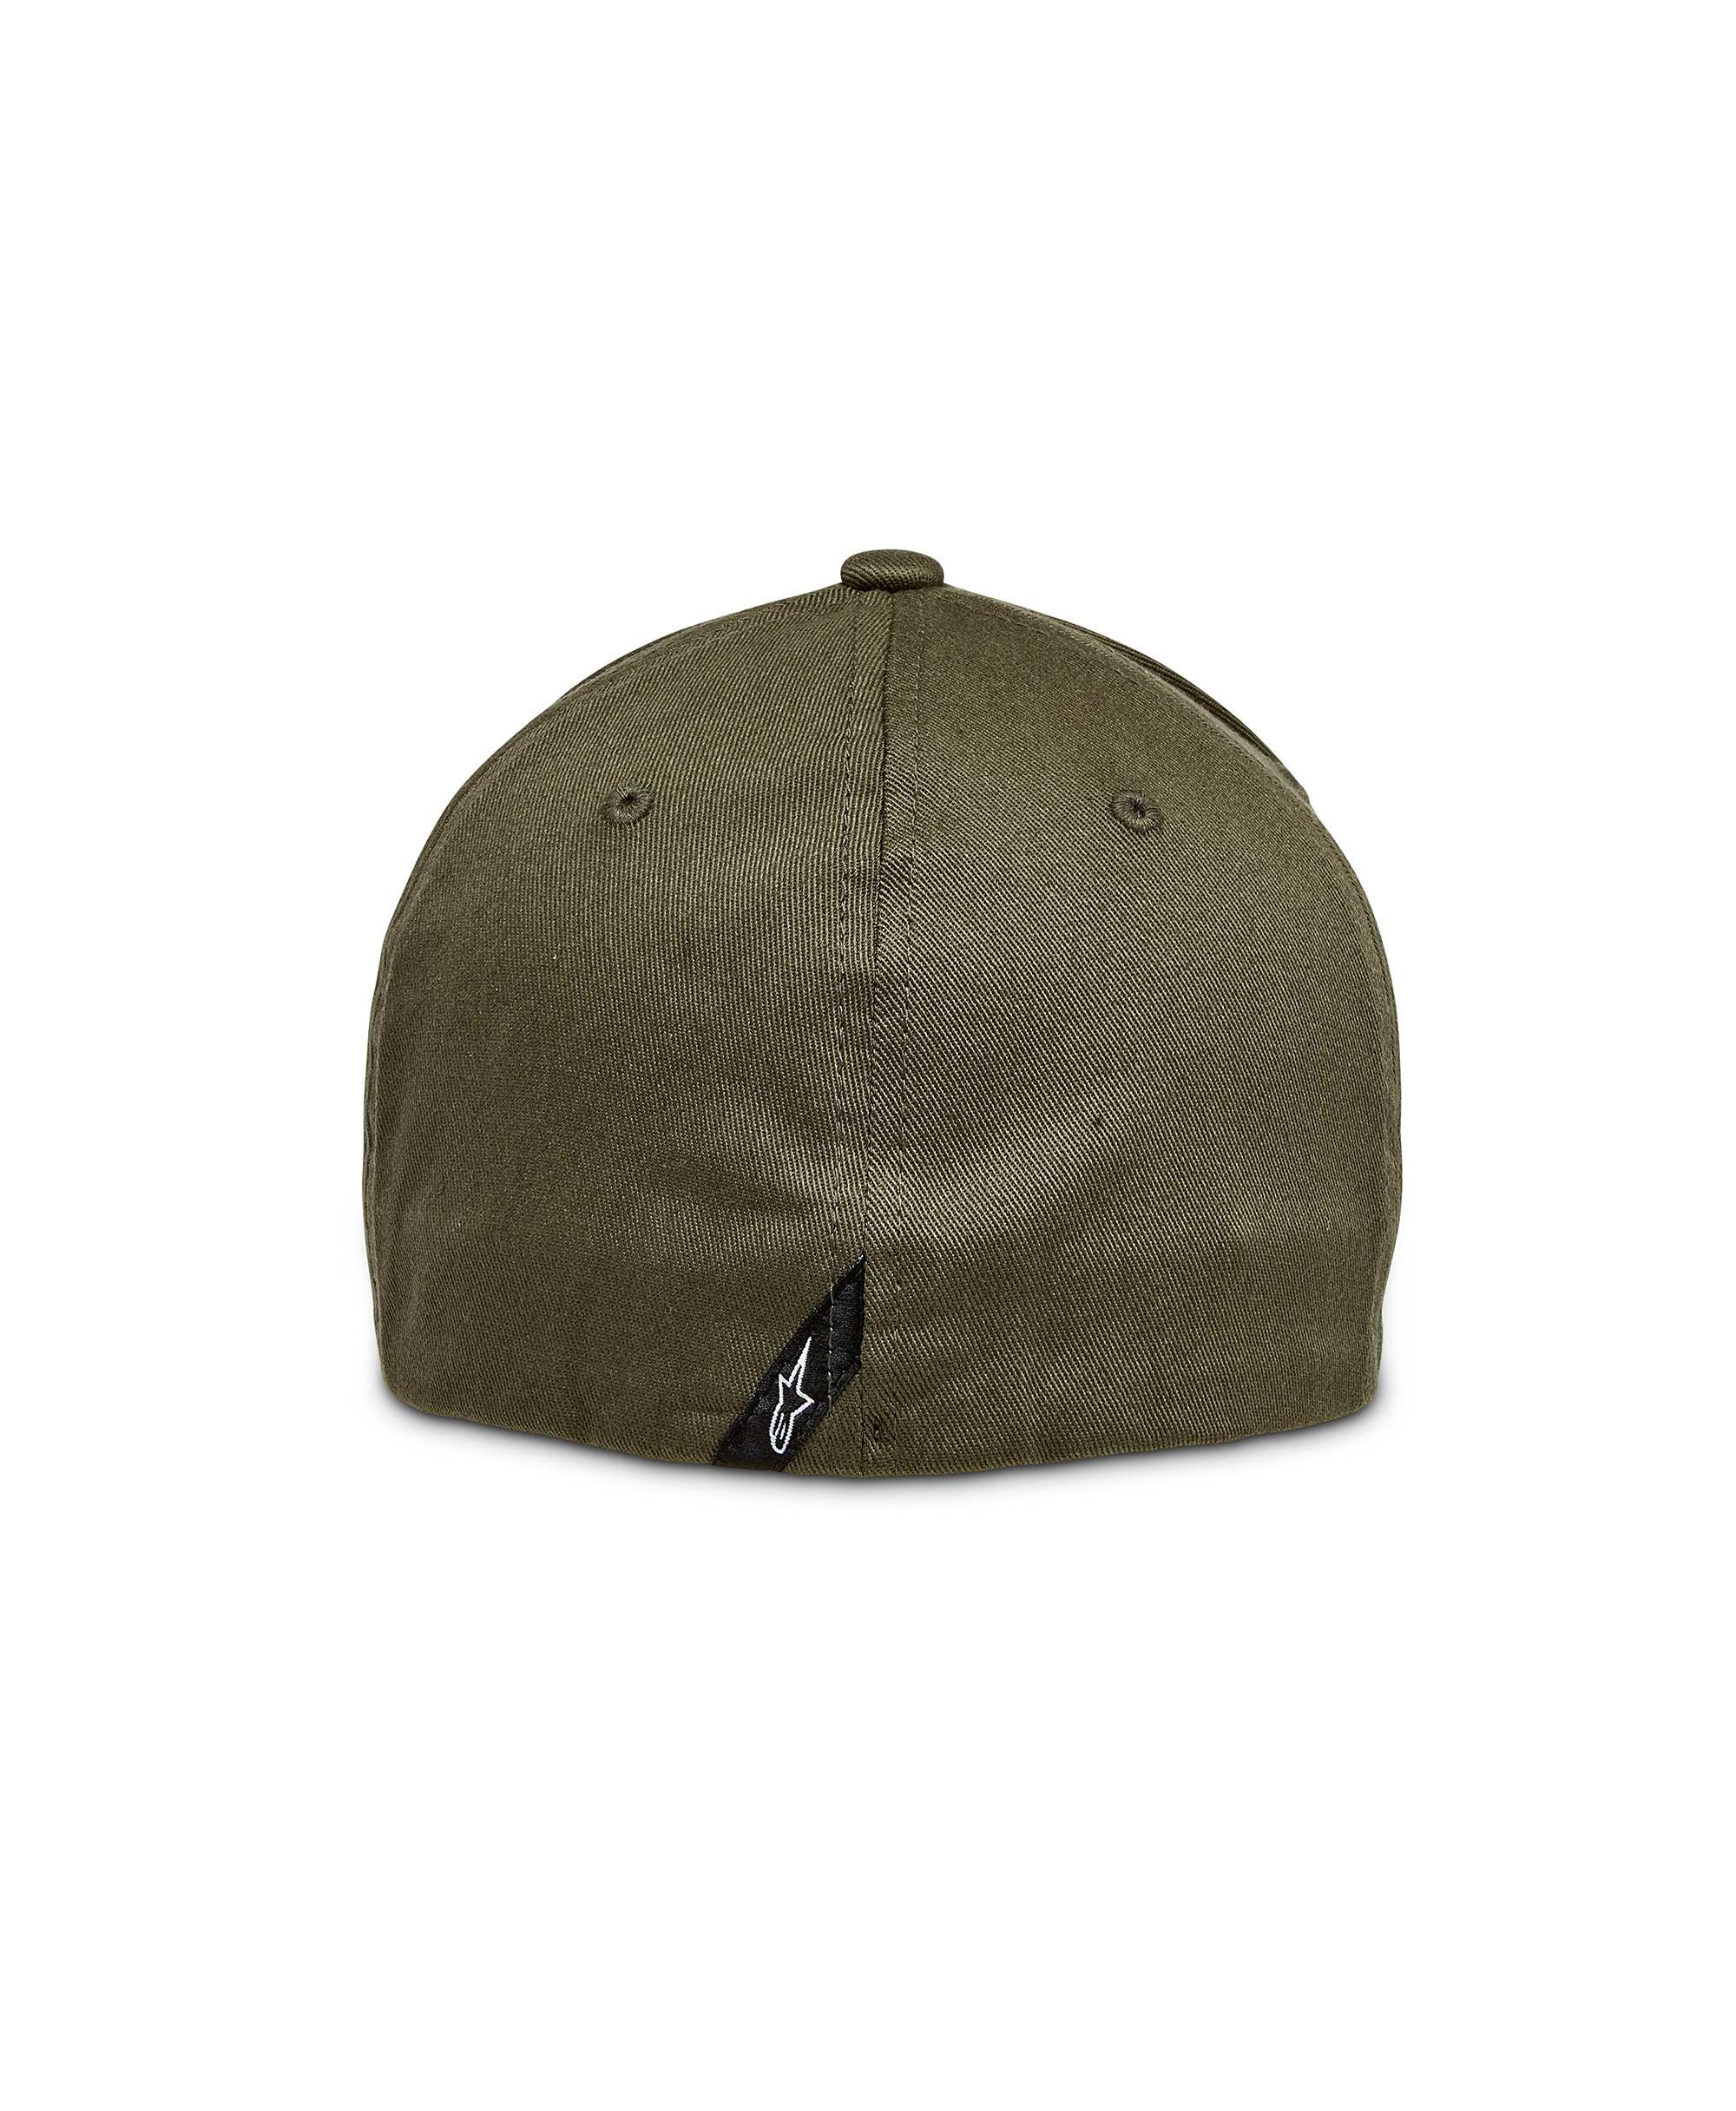 MEDDLE HAT MILITARY GREEN